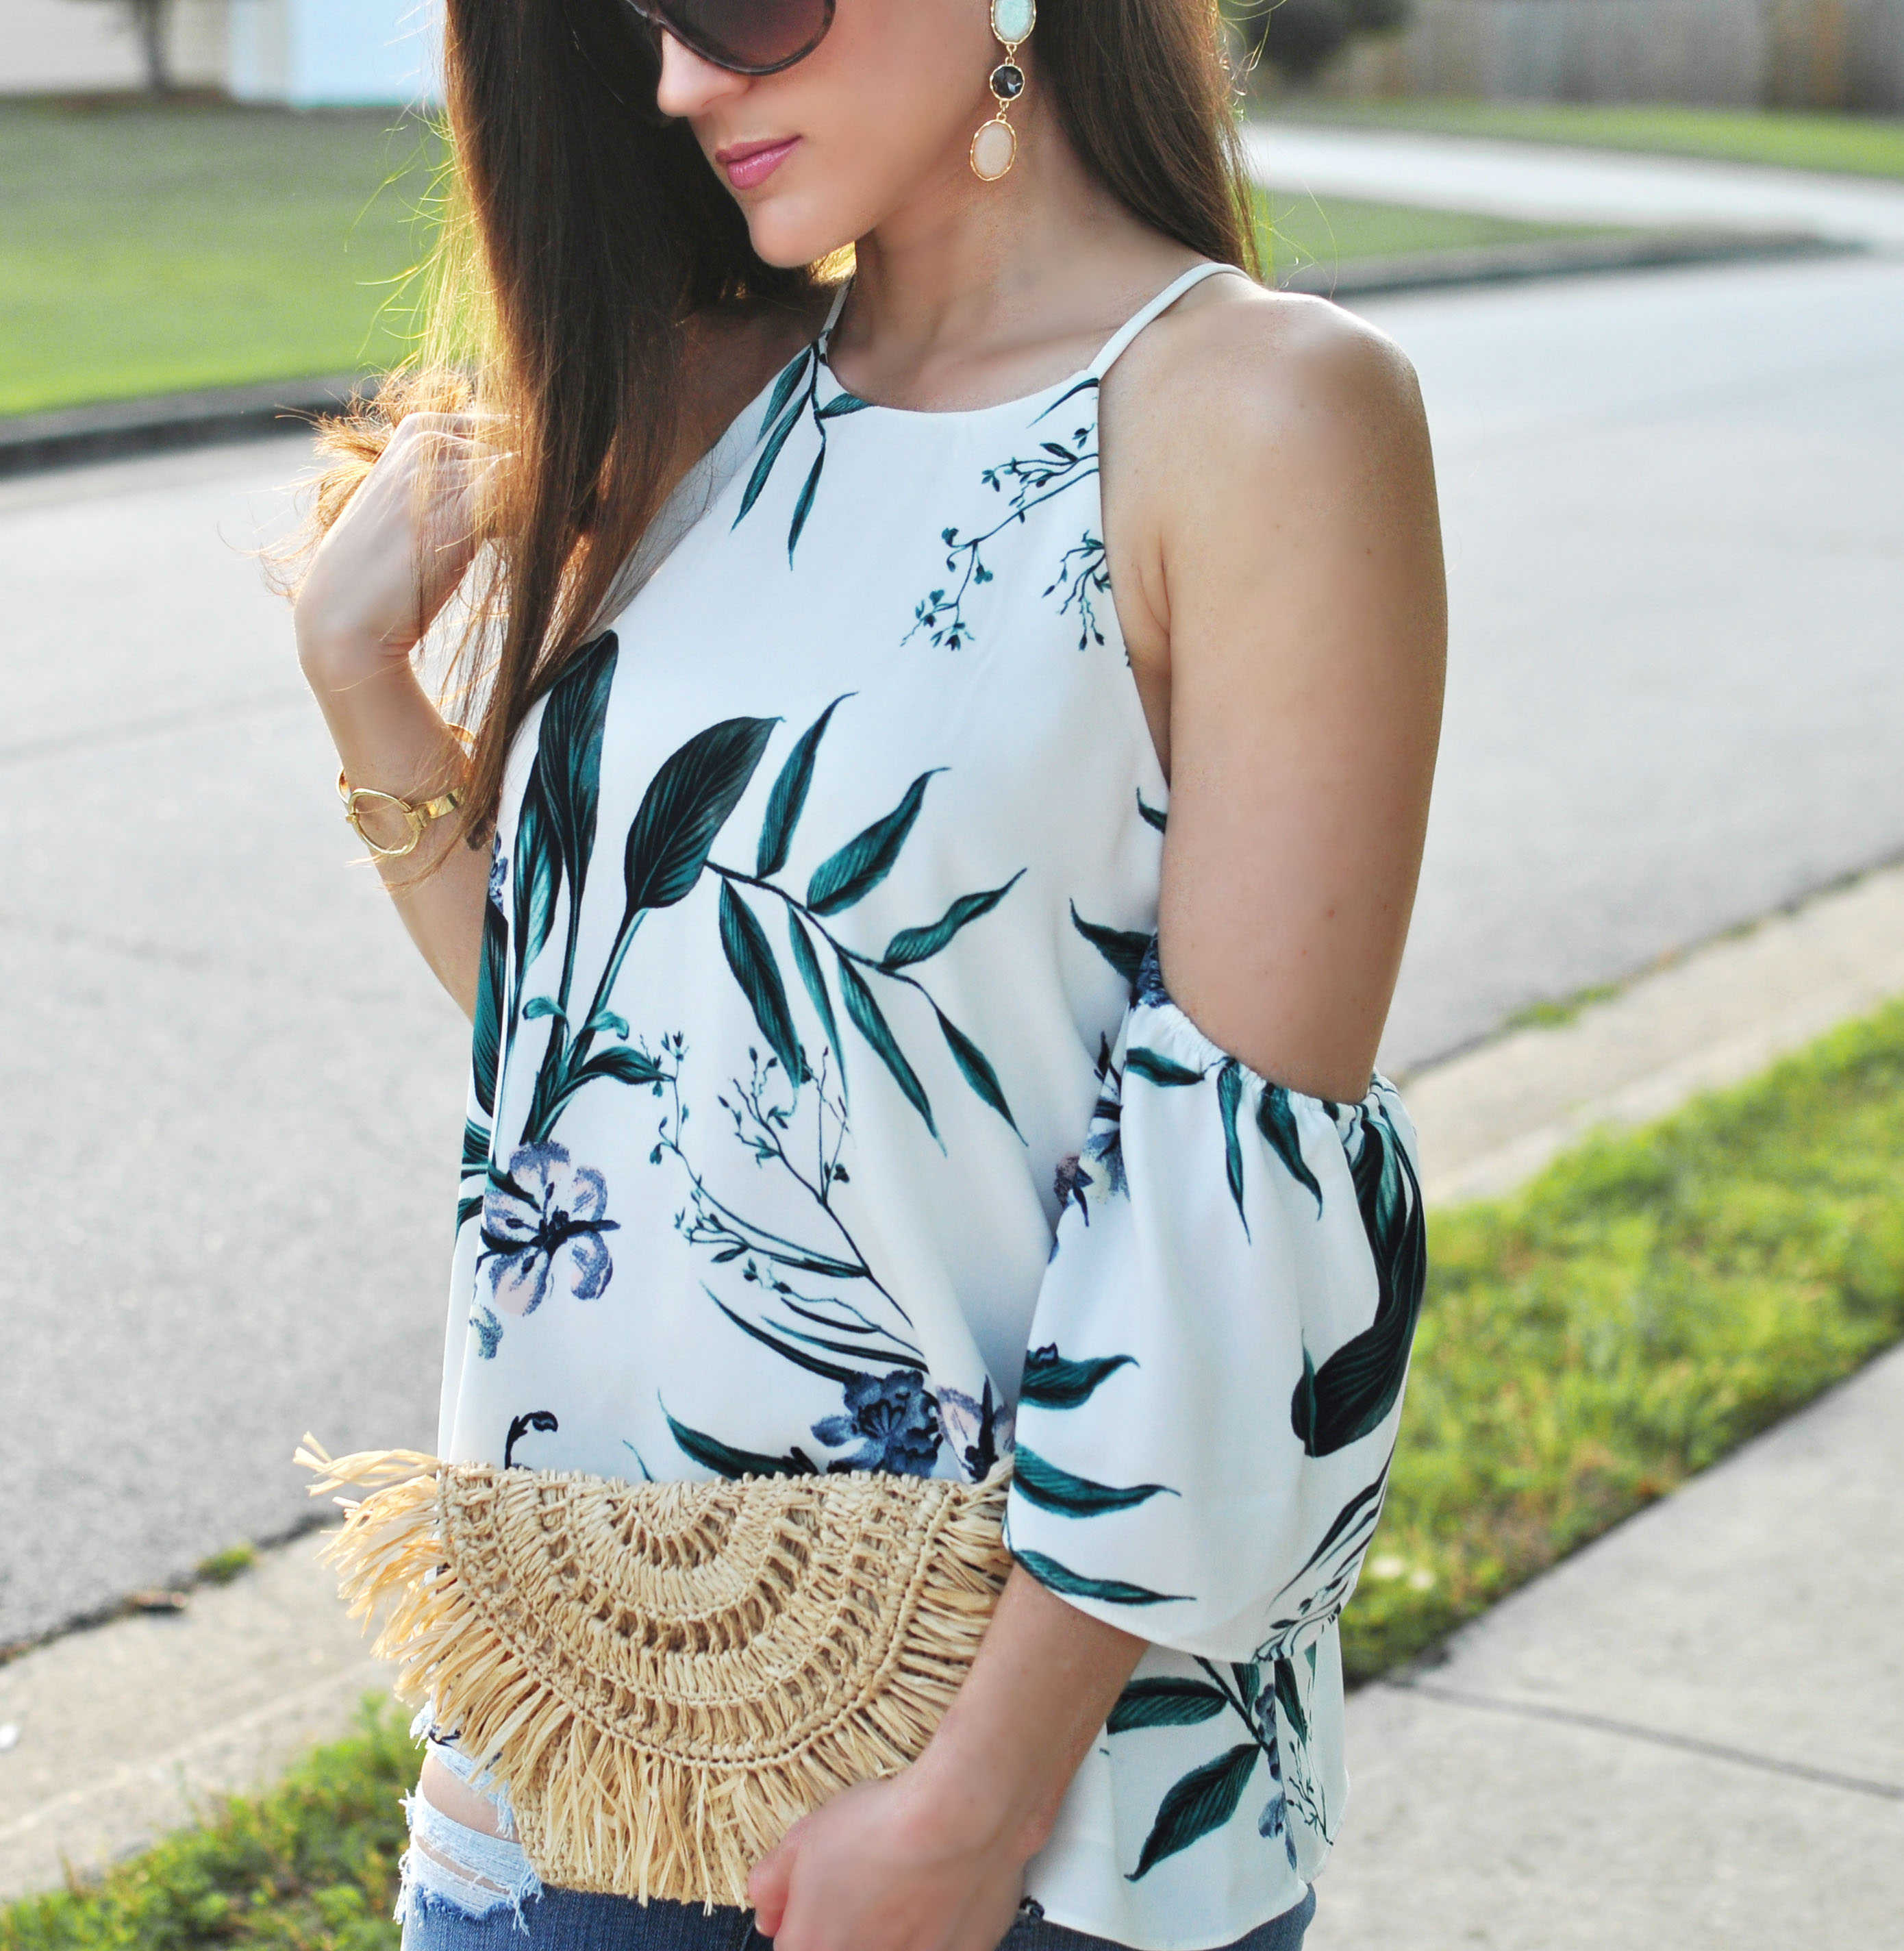 Floral Open Back Cold Shoulder Top from Dynamite Clothing modeled by Atlanta Style Blogger Erica Valentin